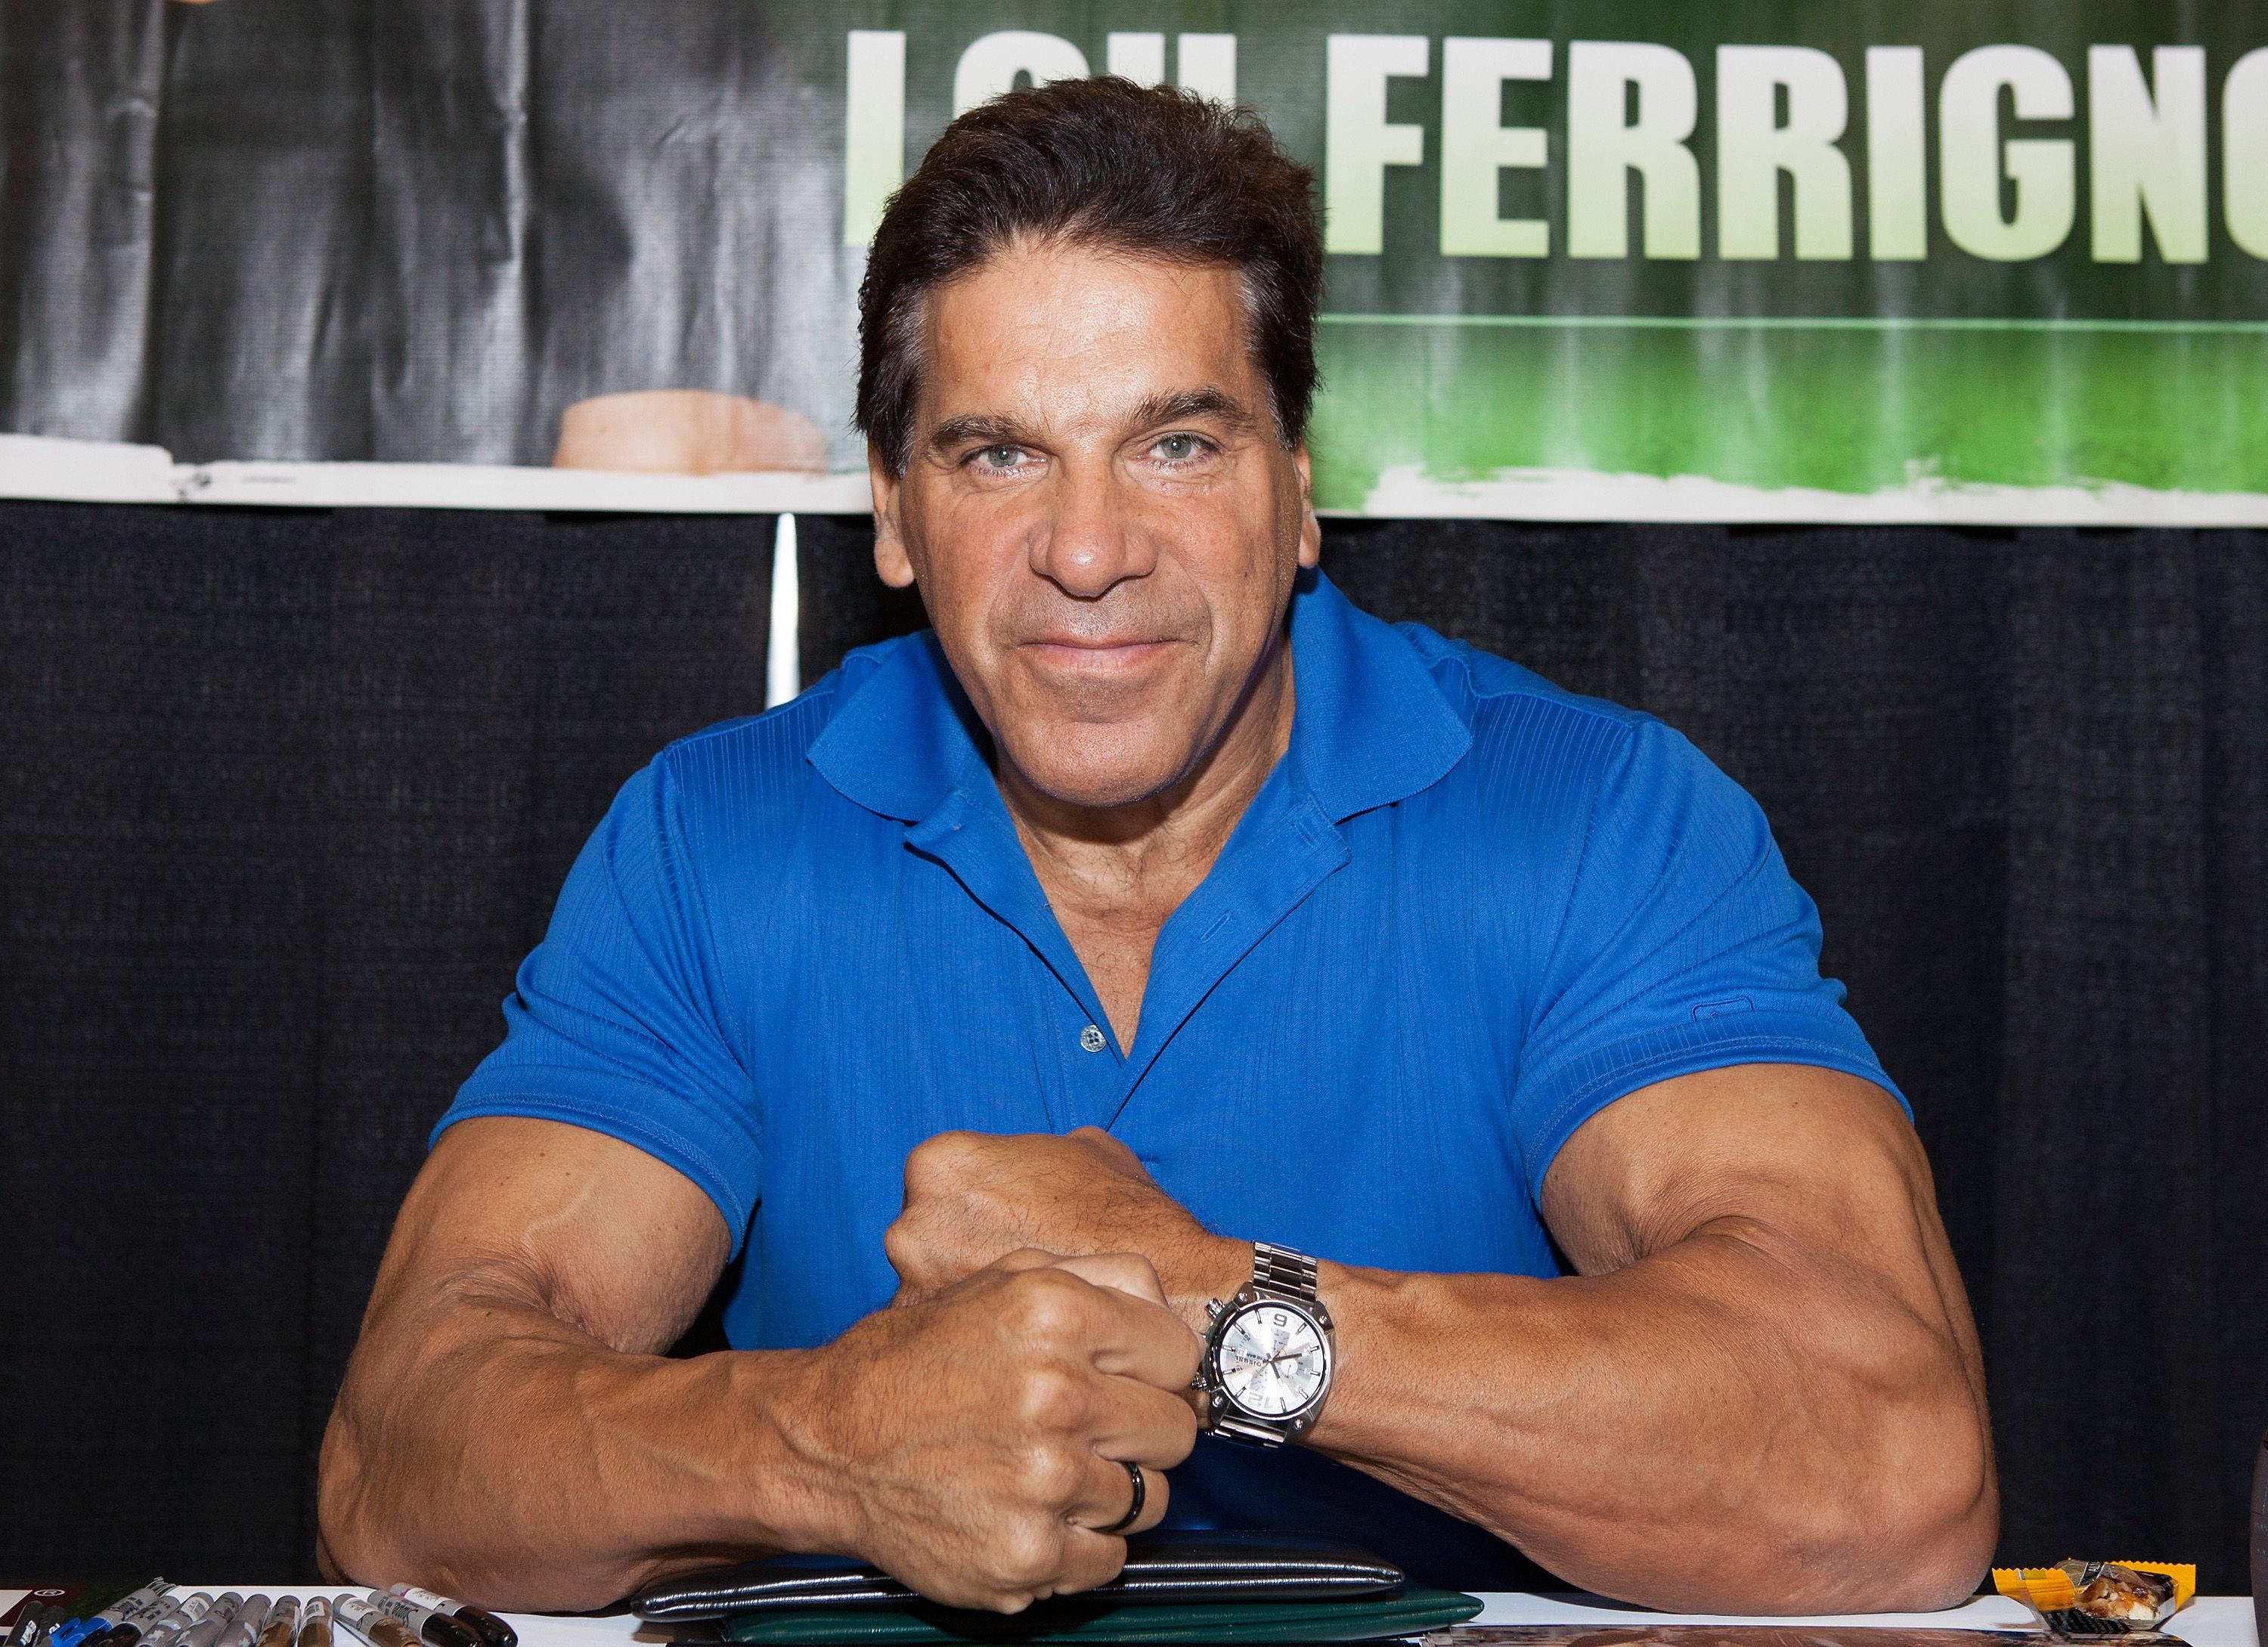 Lou Ferrigno Net Worth - From Bodybuilding To The Incredible Hulk